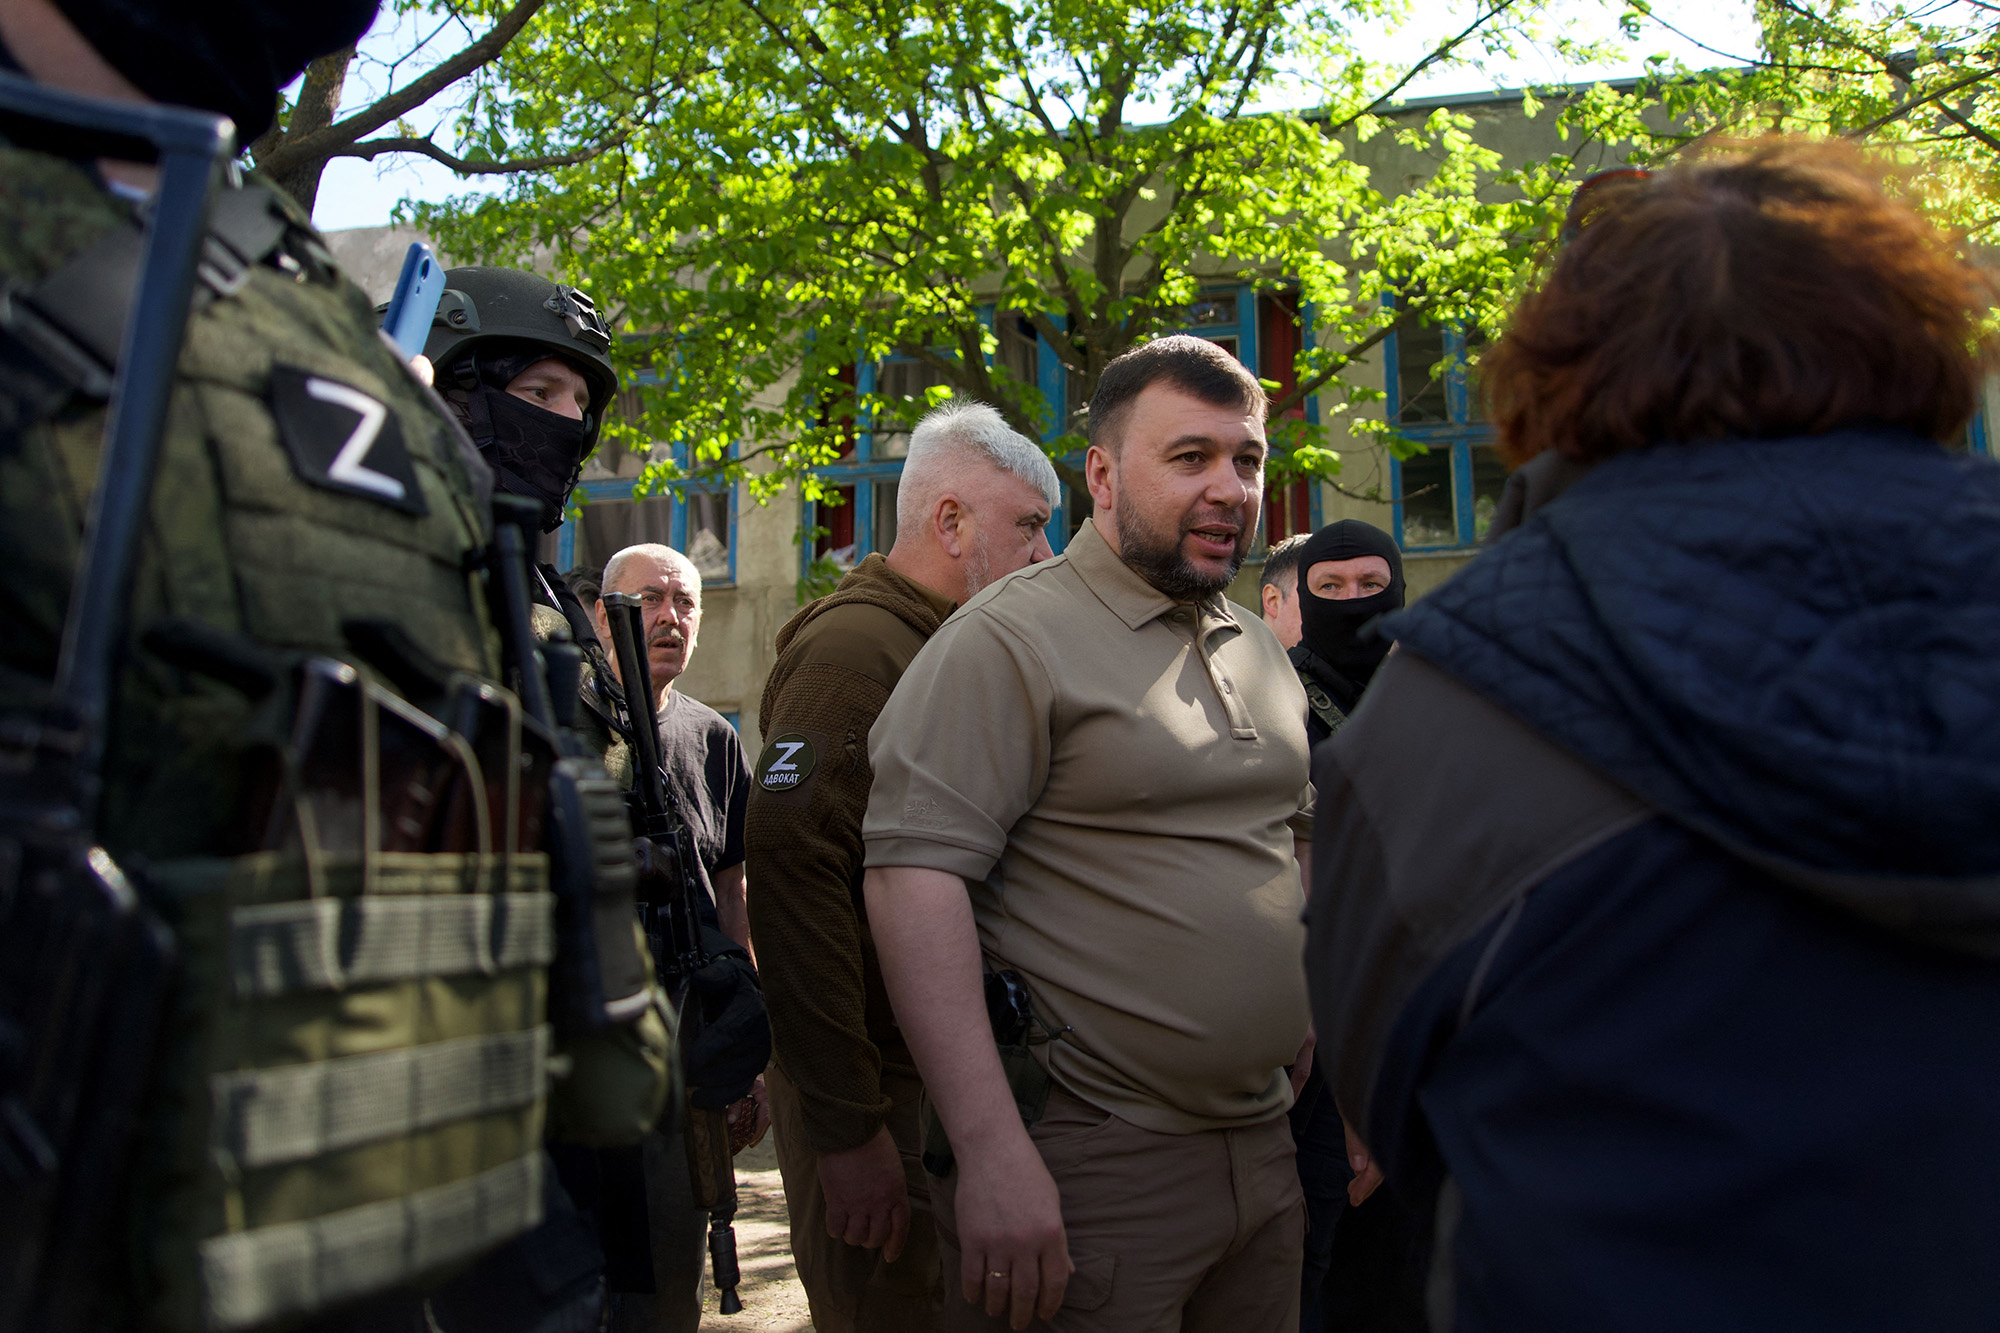 Denis Pushilin, center, leader of the separatists in the self-proclaimed Donetsk People's Republic (DNR), meets with local residents in the city of Mariupol, Ukraine, on April 29.